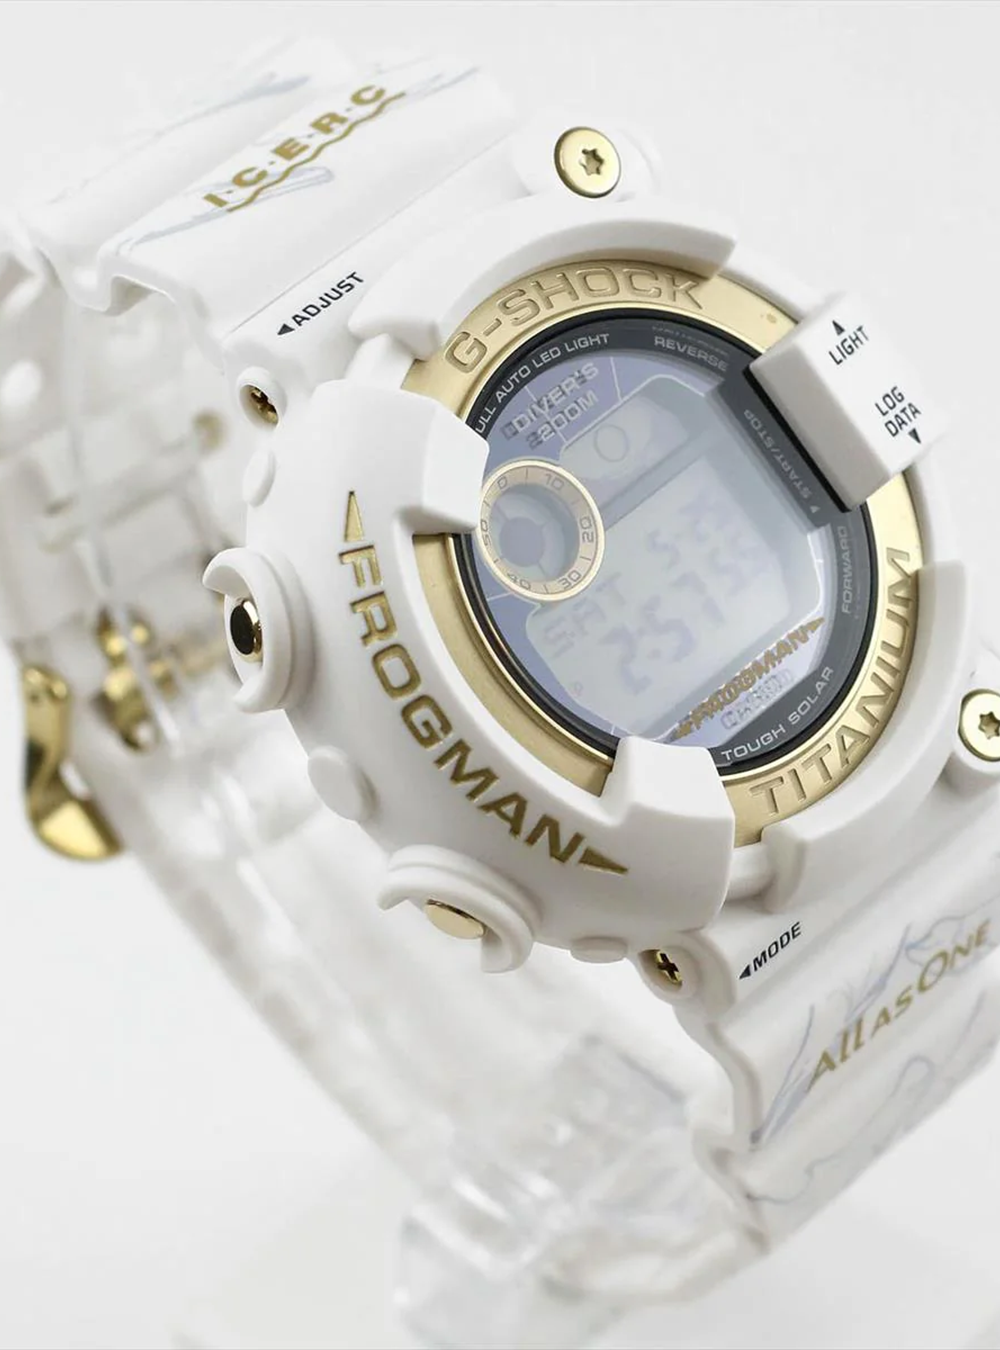 CASIO WATCH G-SHOCK MASTER OF G - SEA FROGMAN LOVE THE SEA AND THE 